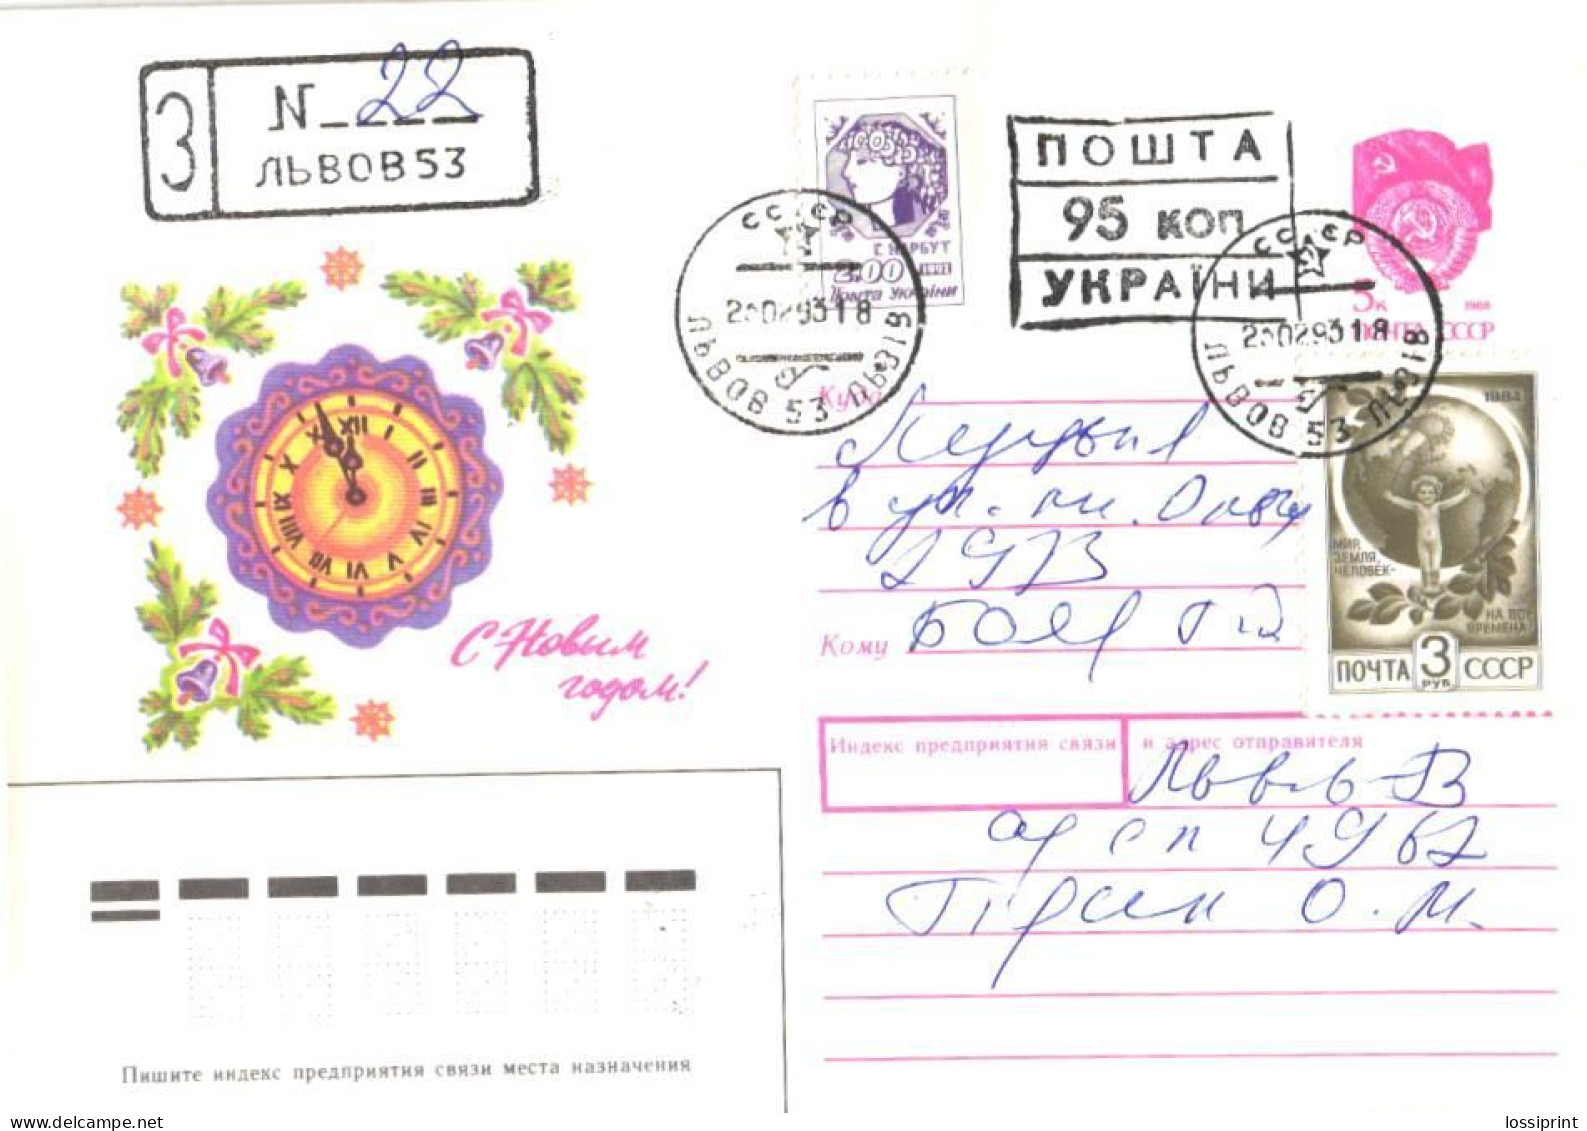 Ukraine:Ukraina:Registered Letter From Lvov 53 With Stamp Cancellation And Ukraine And Soviet Union Stamps, 1993 - Ucraina